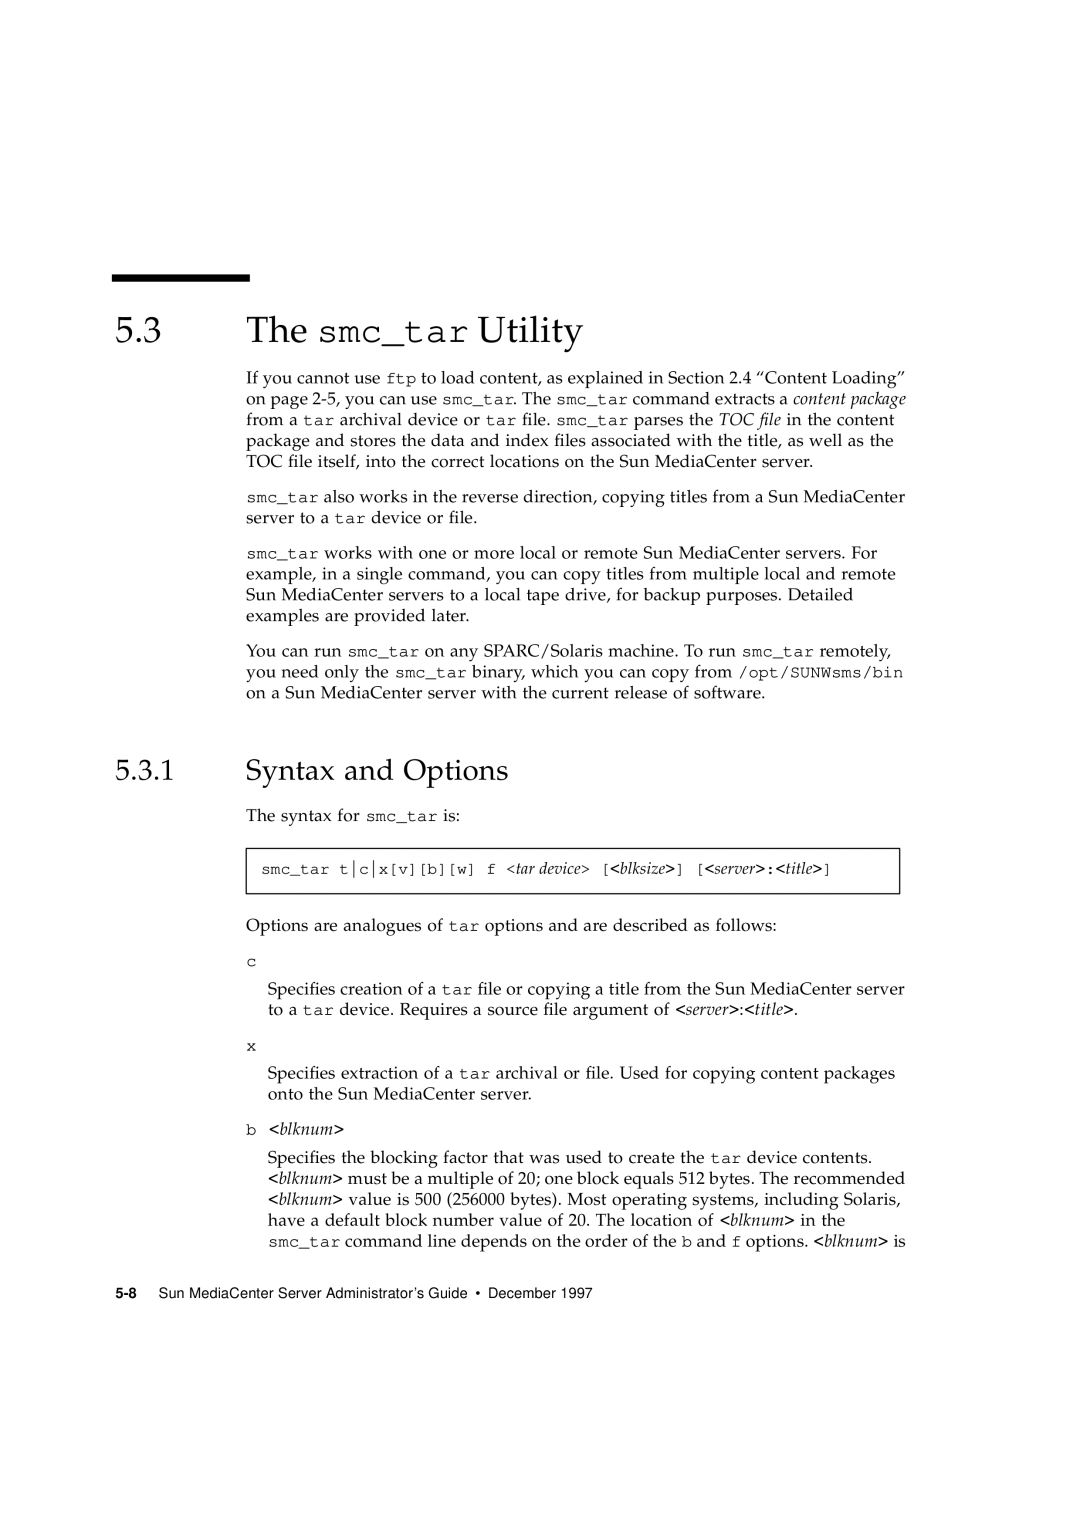 Sun Microsystems 2.1 manual The smctar Utility, Syntax and Options, b blknum 